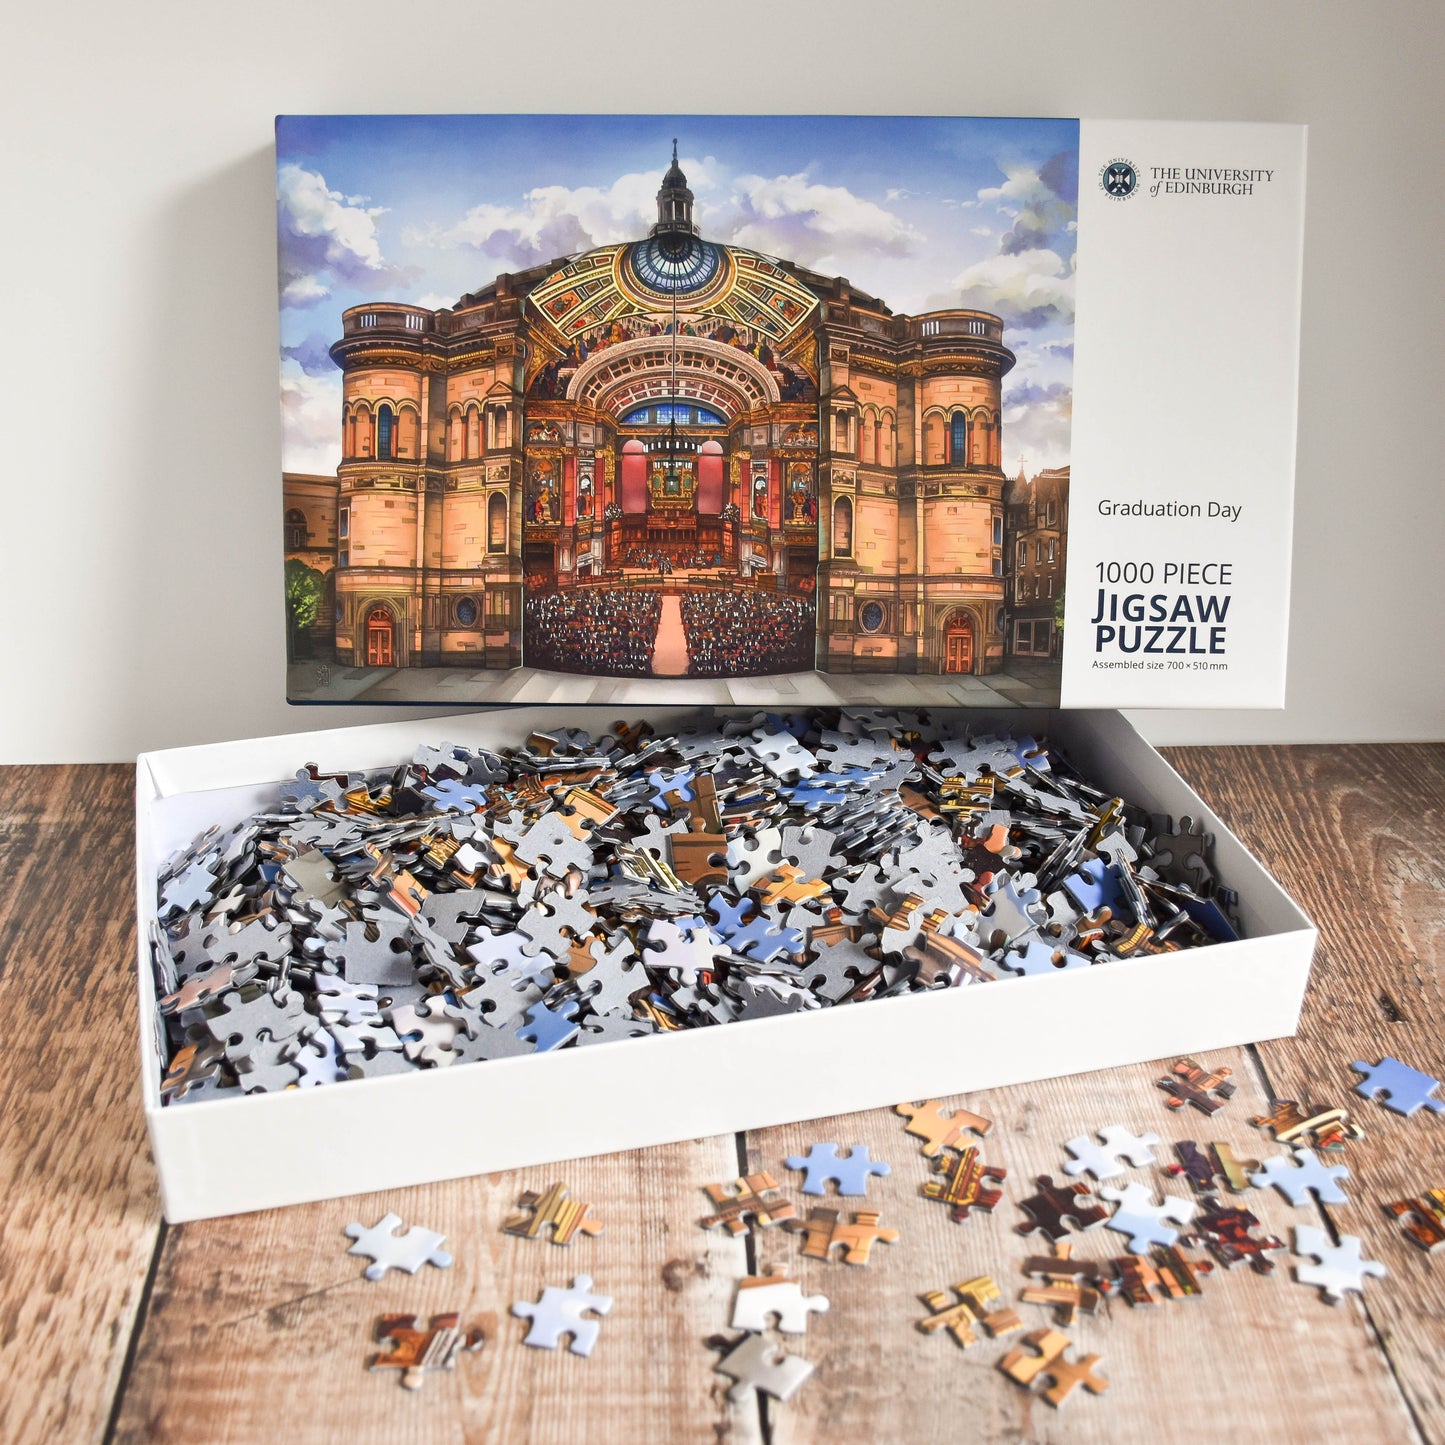 Image of open puzzle box with the pieces inside, puzzle pieices are also scattered around box.